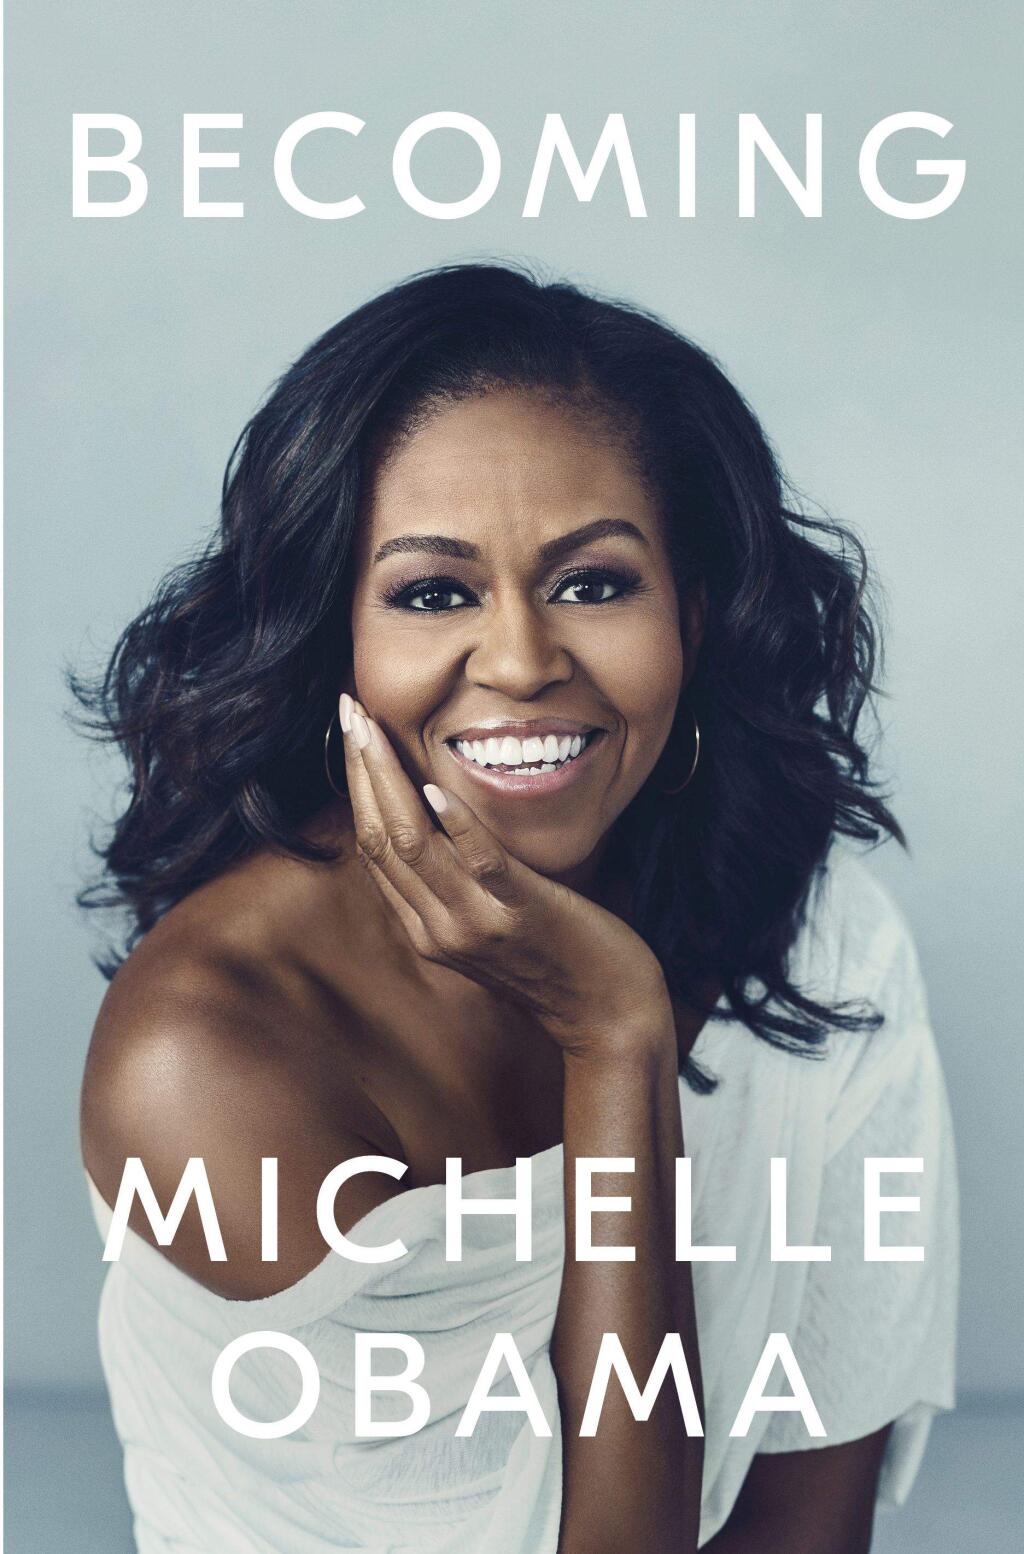 FIRST LADY: Michelle Obama's memoir is once again No. 1 on the local bestselling fiction and nonfiction books list.